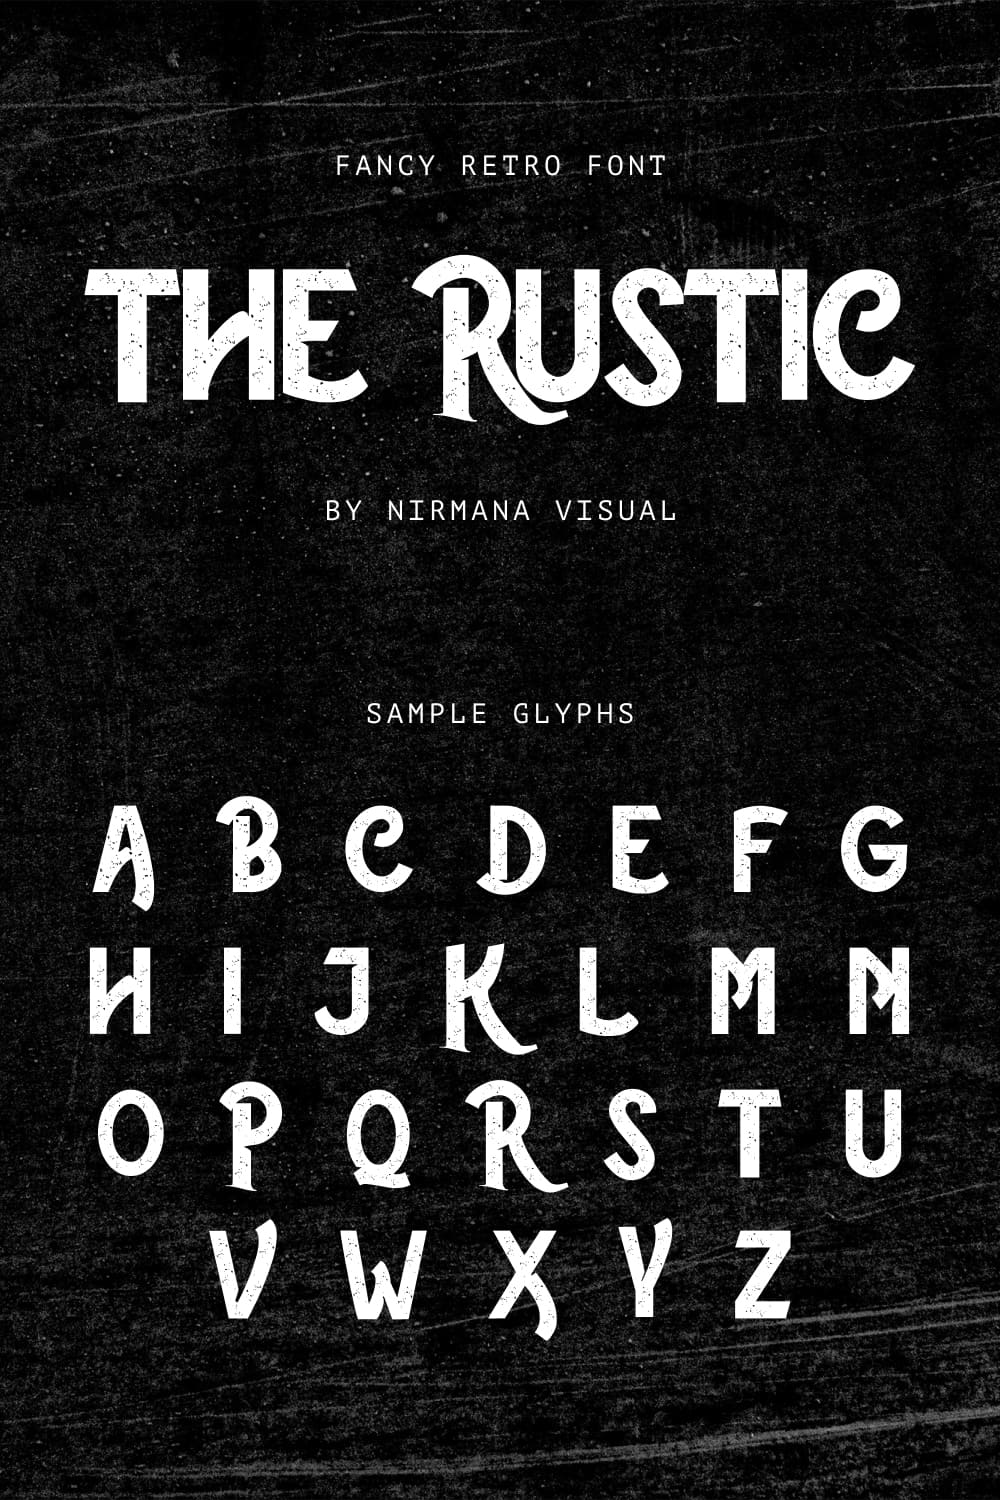 The rustic free font pinterest preview with sample glyphs by MasterBundles.